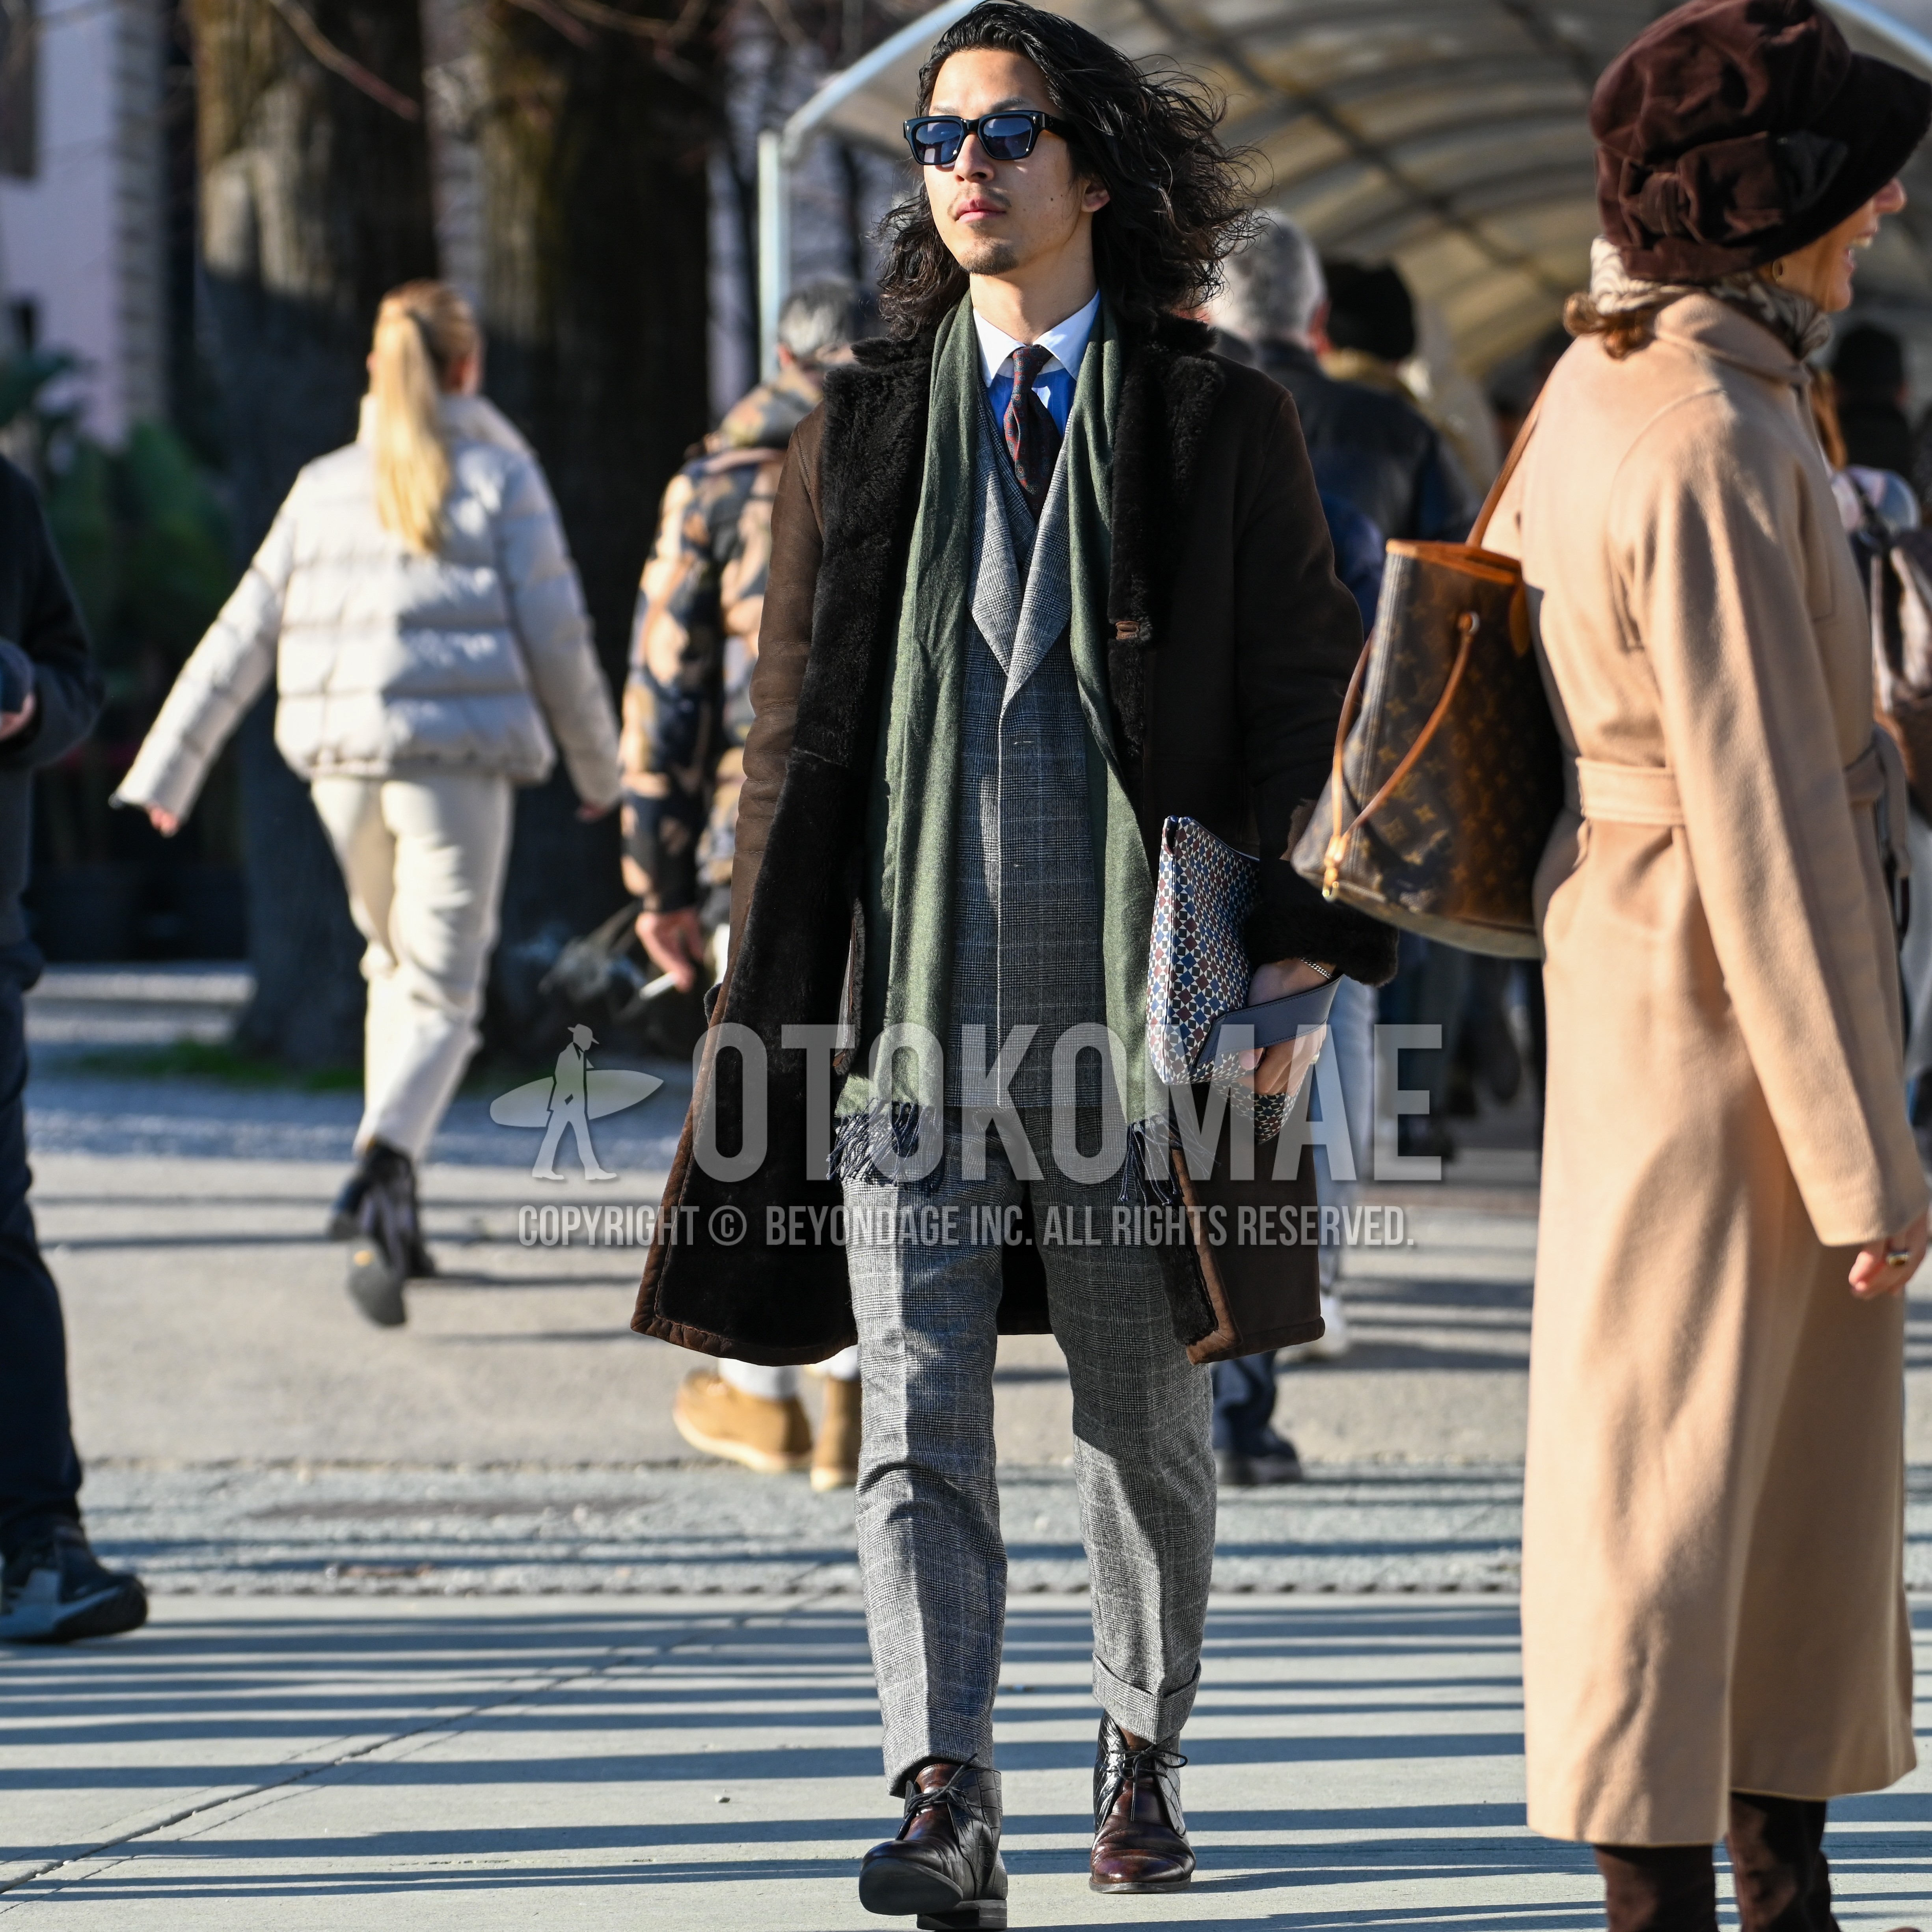 Men's autumn winter outfit with black plain sunglasses, olive green plain scarf, brown outerwear, light blue white tops/innerwear shirt, brown chukka boots, gray check three-piece suit, brown whole pattern necktie.